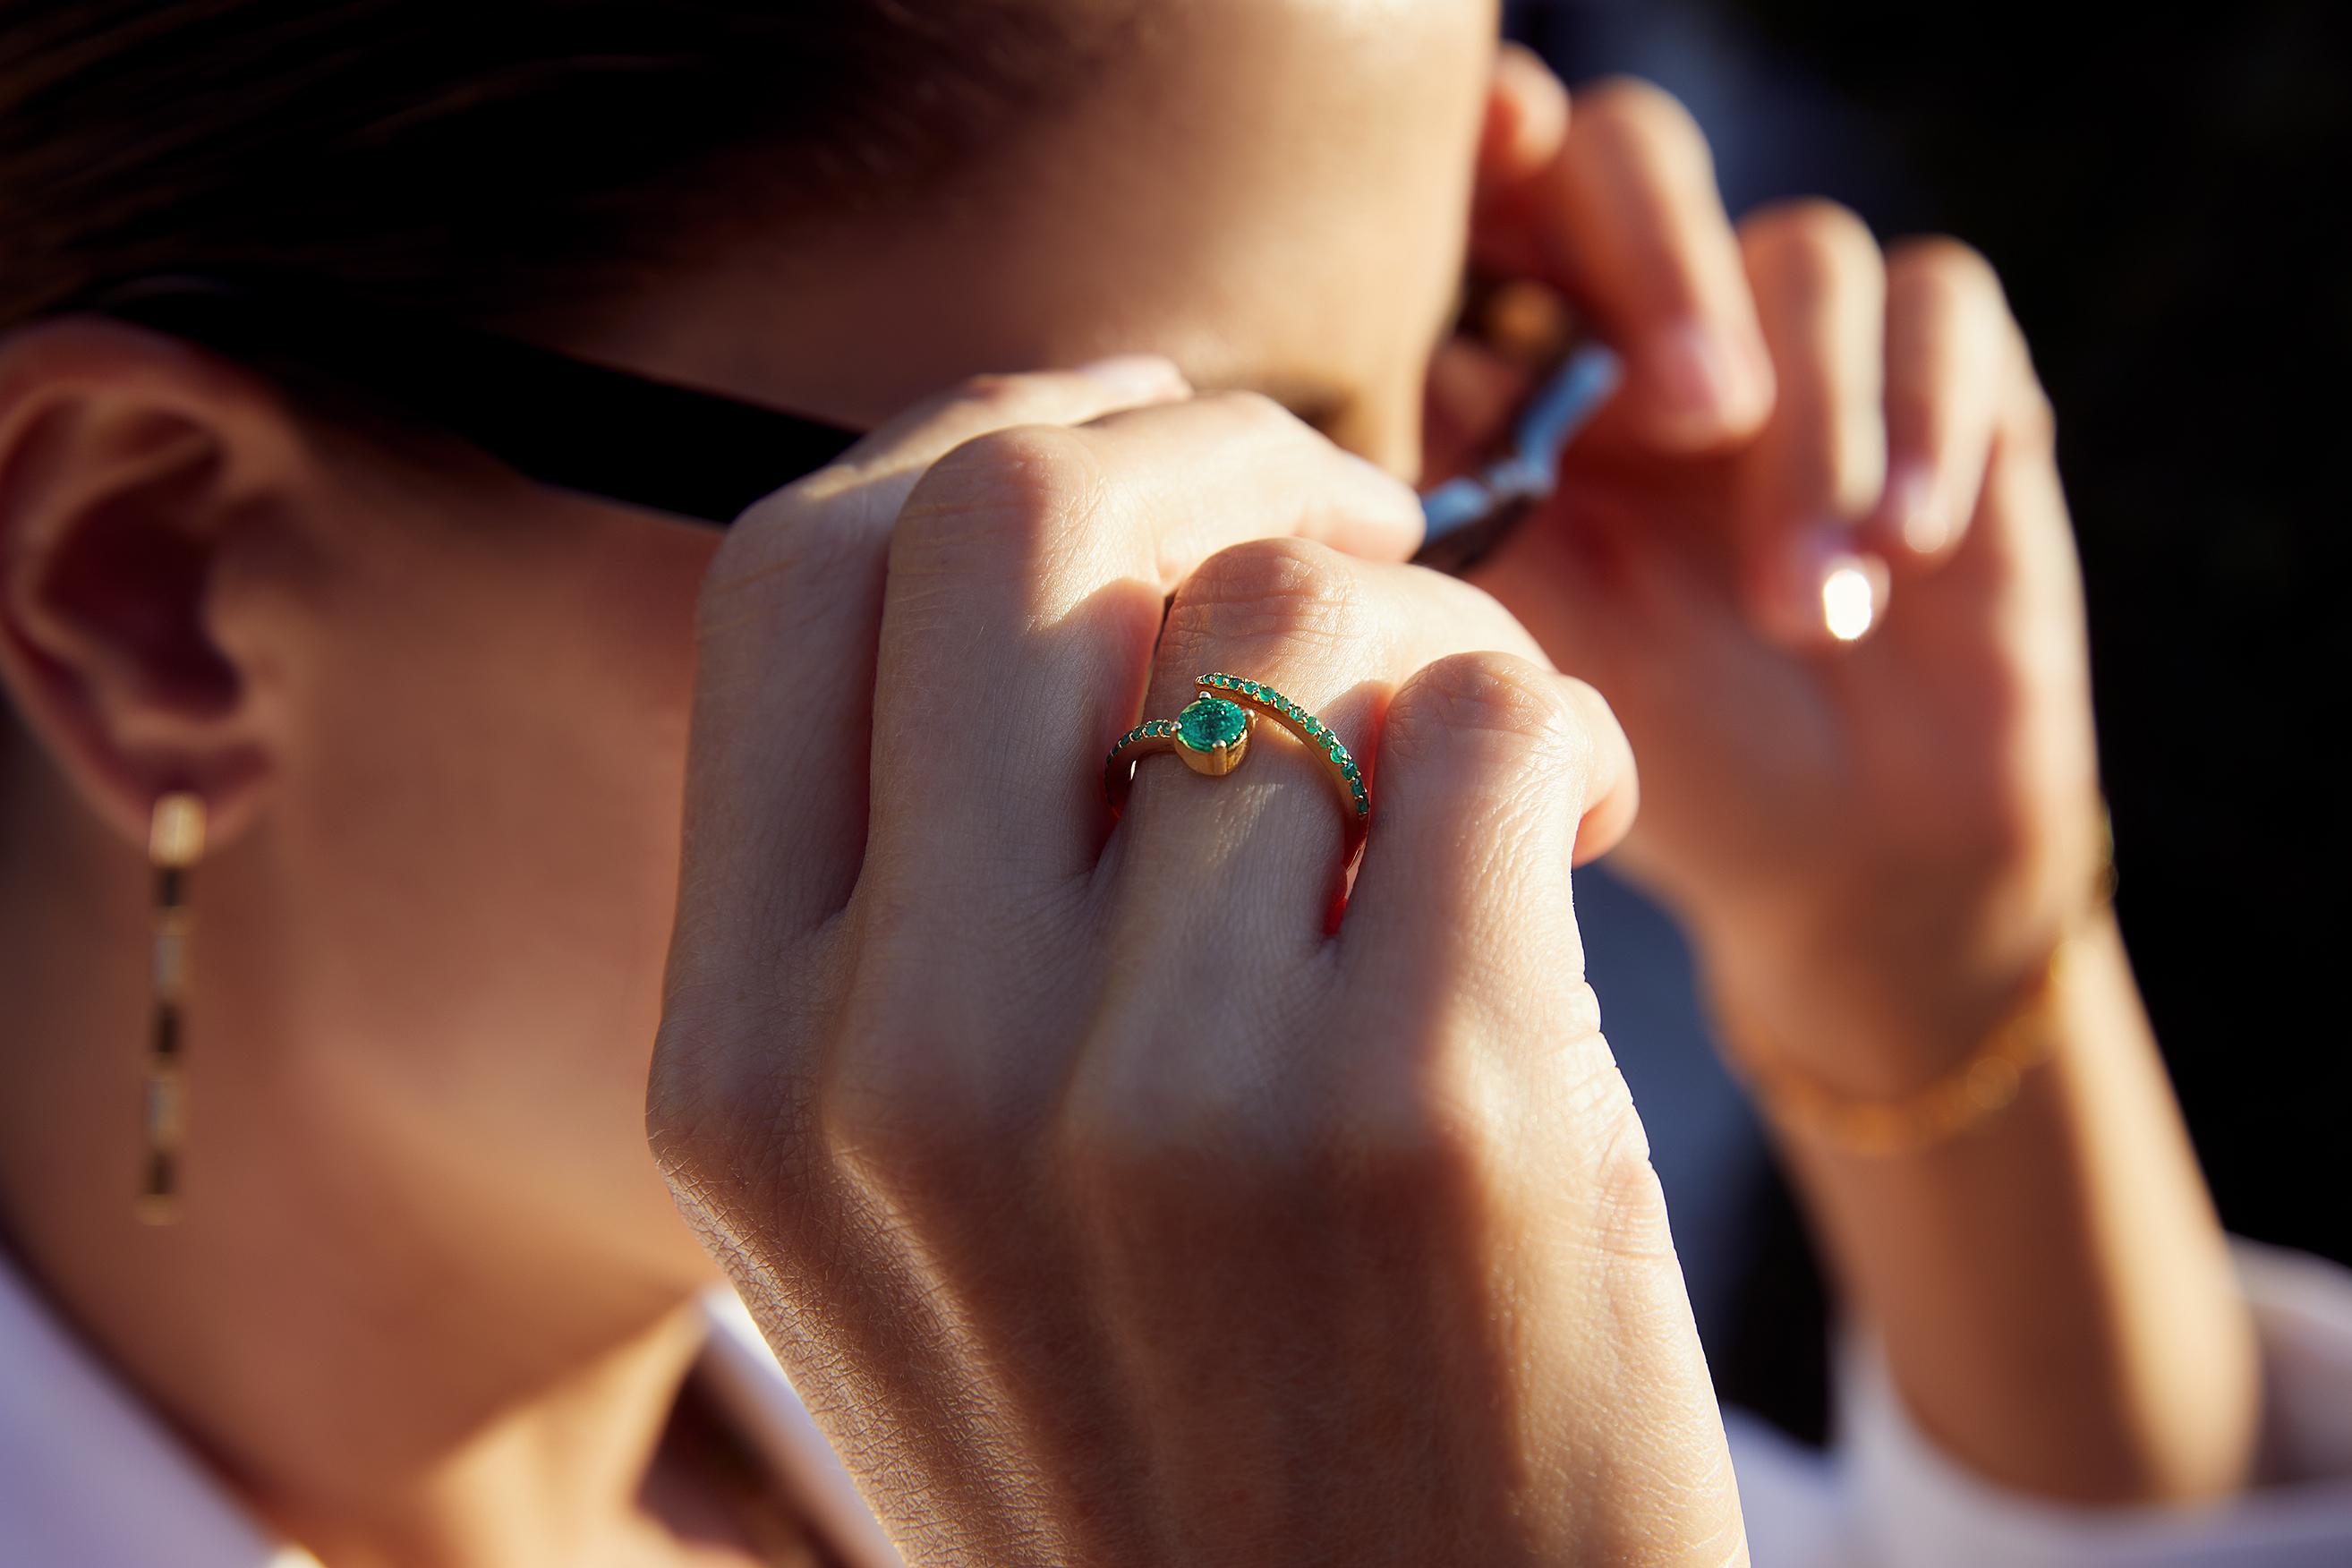 The Grass Seed ring is handcrafted from 18k polished gold and features an Emerald “seed” with a row of smaller pave emeralds set along a grass “sprout”. Inspired by the magic that transpires from the simple act of planting a humble seed, wearing it